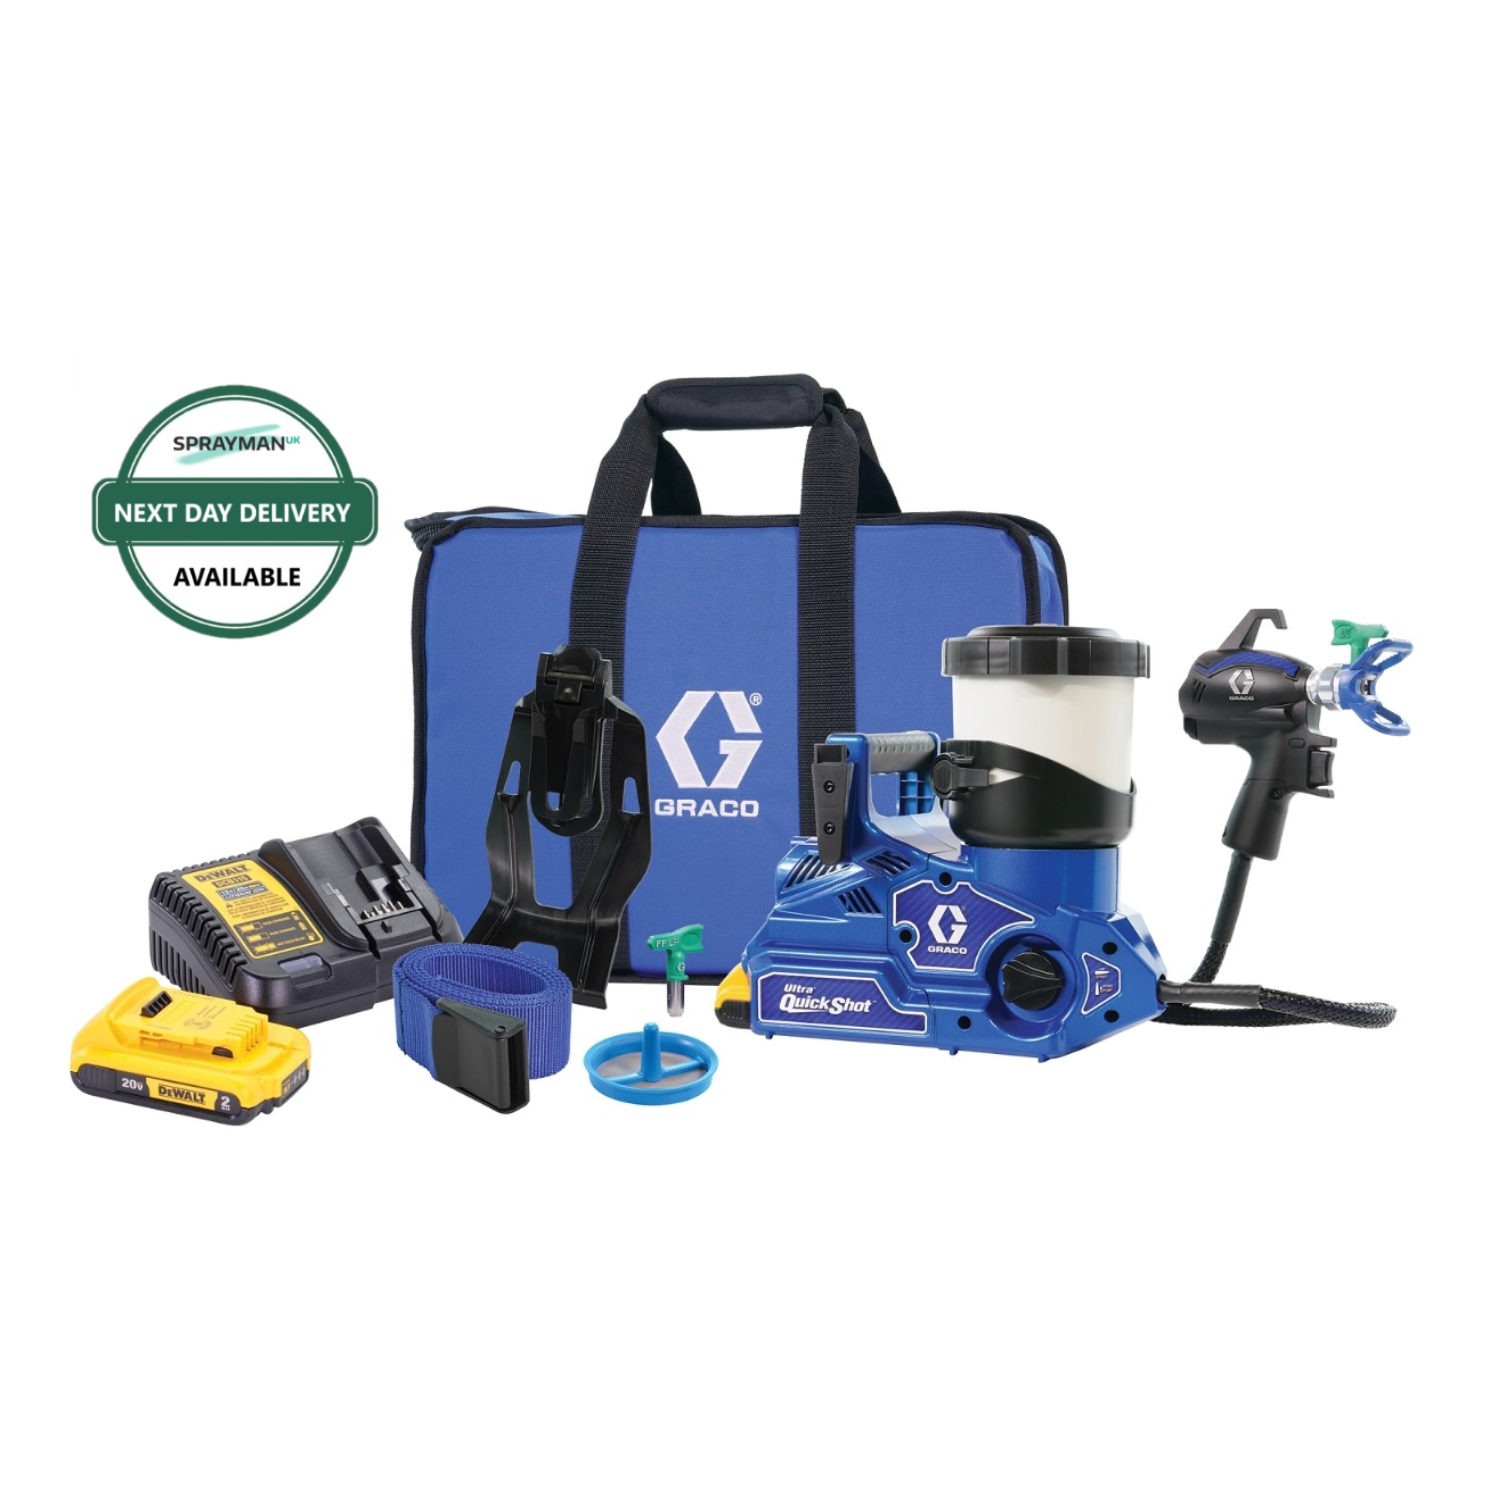 Graco UltraMax Airless Handheld Sprayer - Power Tool Competitions